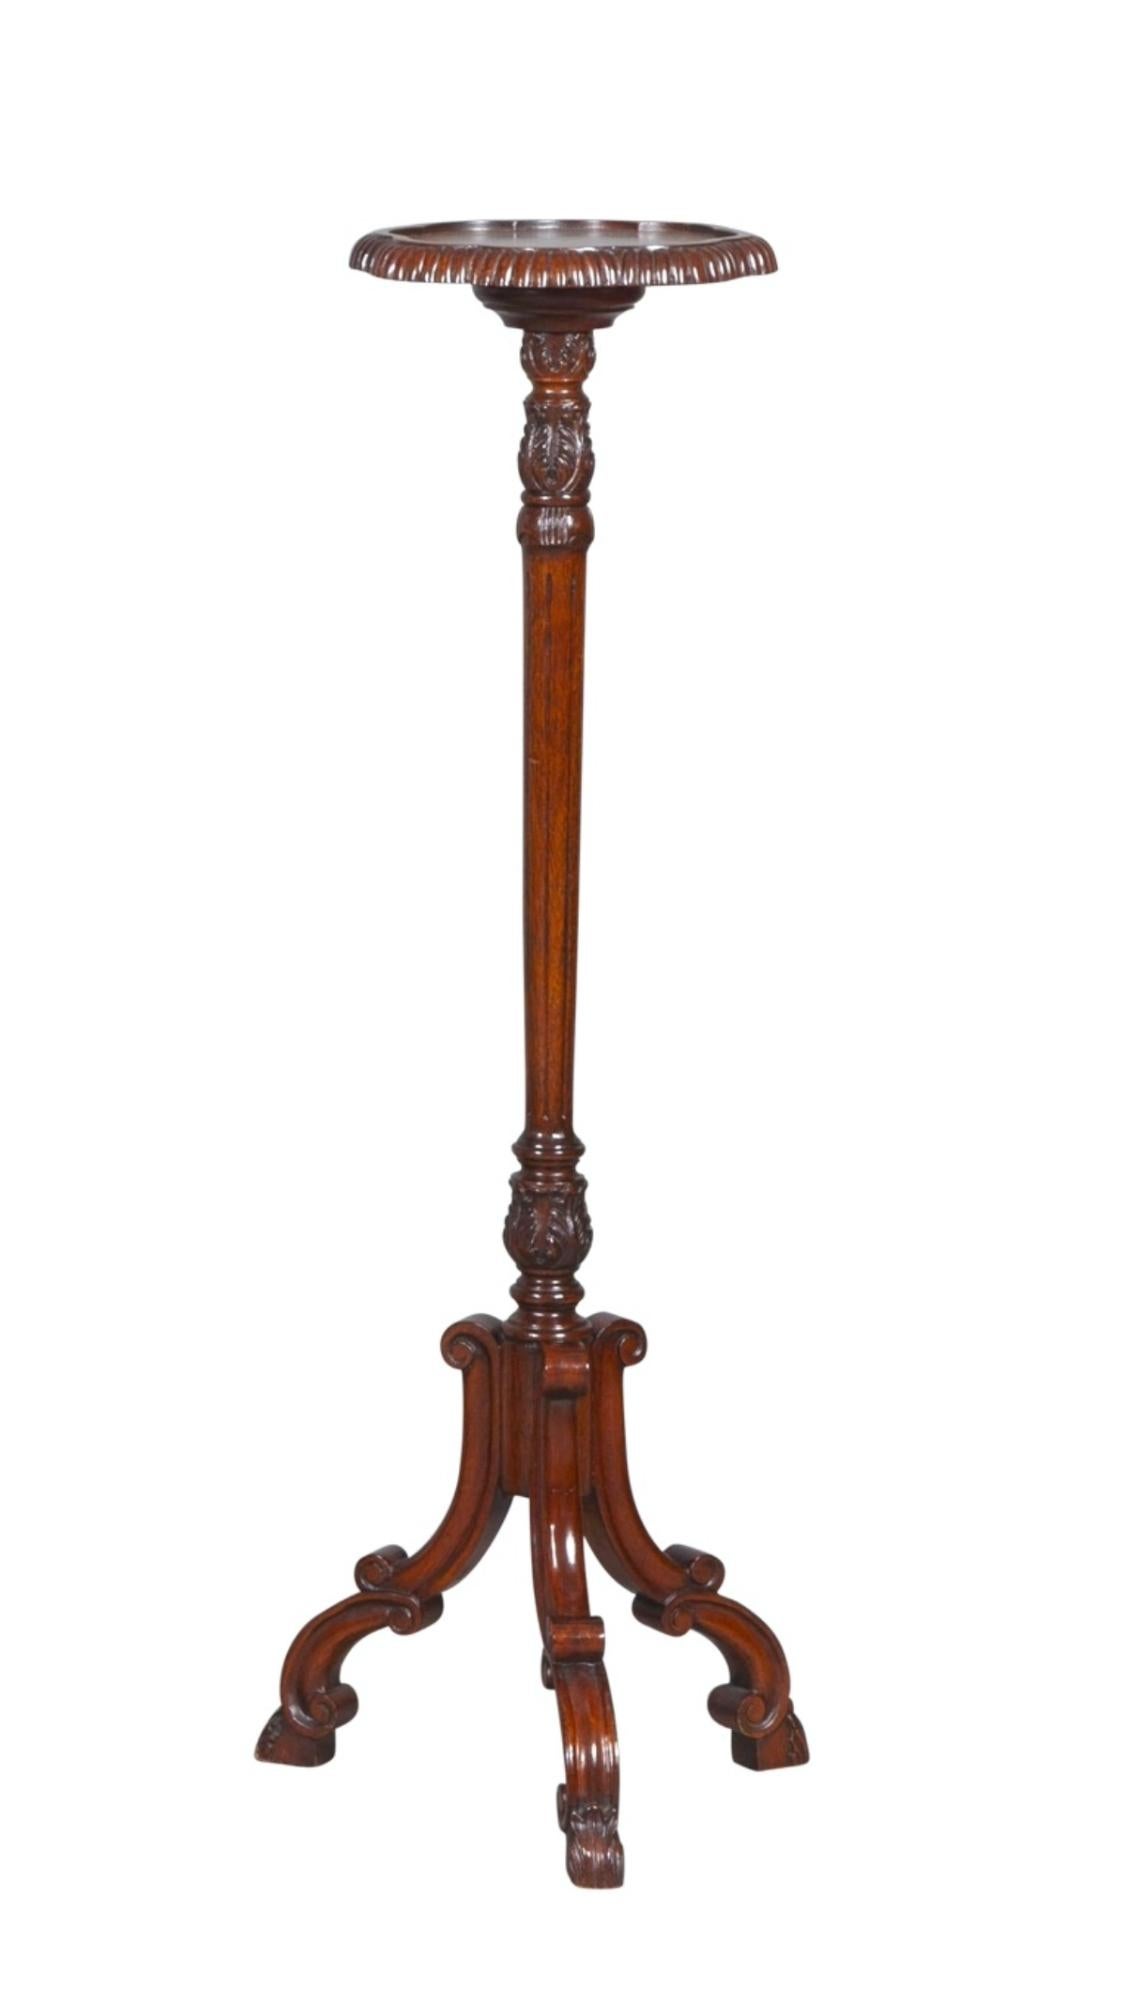 Hand-Carved 19th Century English Chippendale Style Pair Tripod Foot Candle Stand / Pedestal For Sale